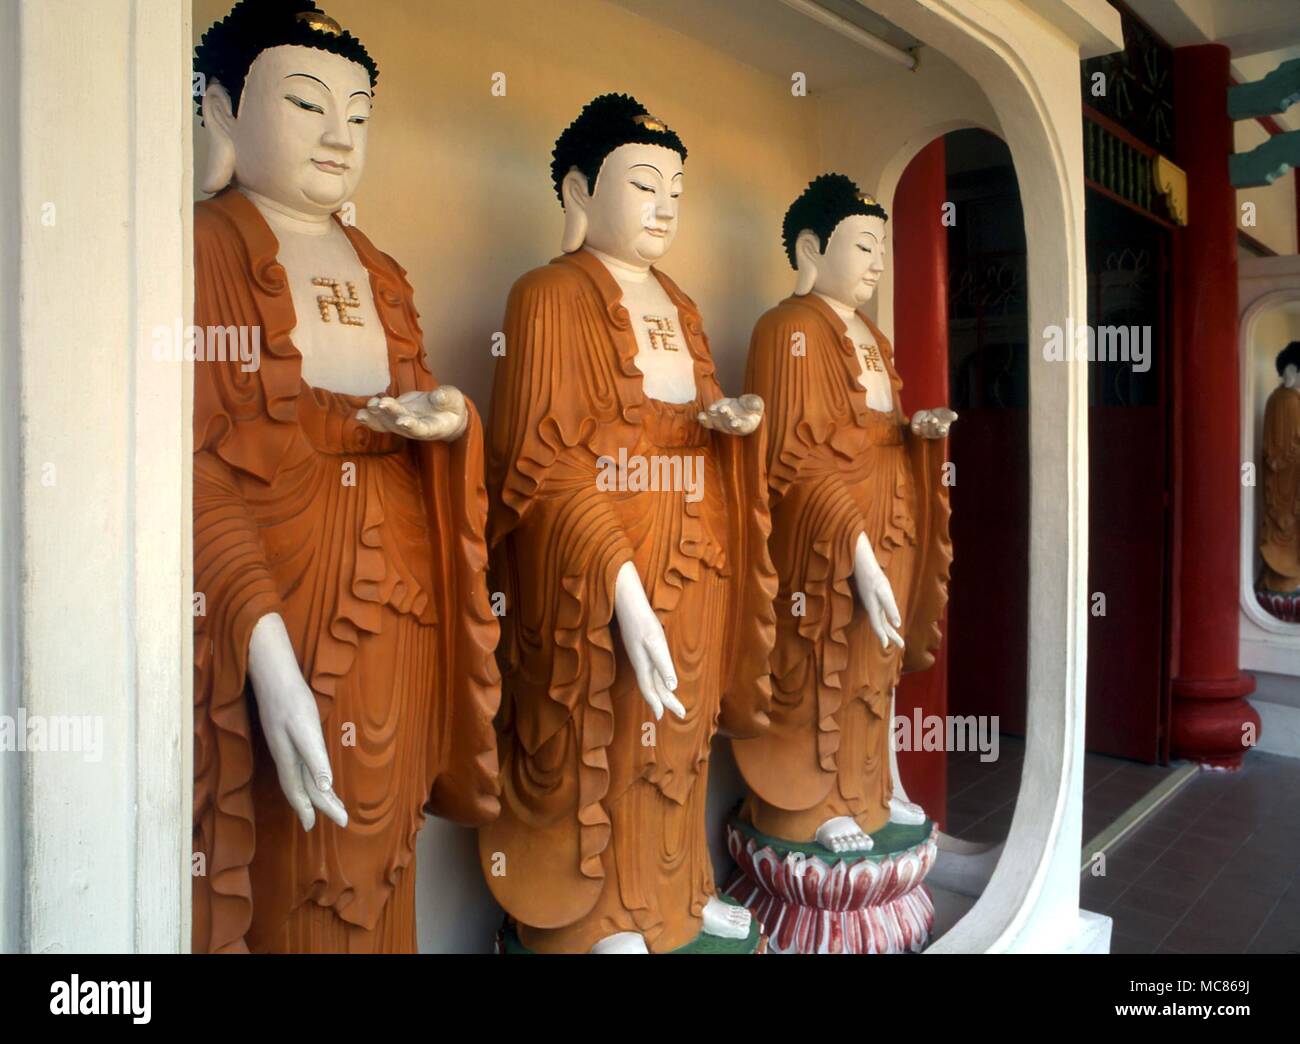 Line of upright (standing) Buddhist figures (perhaps Bodhisattvas) in the temple of Kek Lok Si, Penang Stock Photo